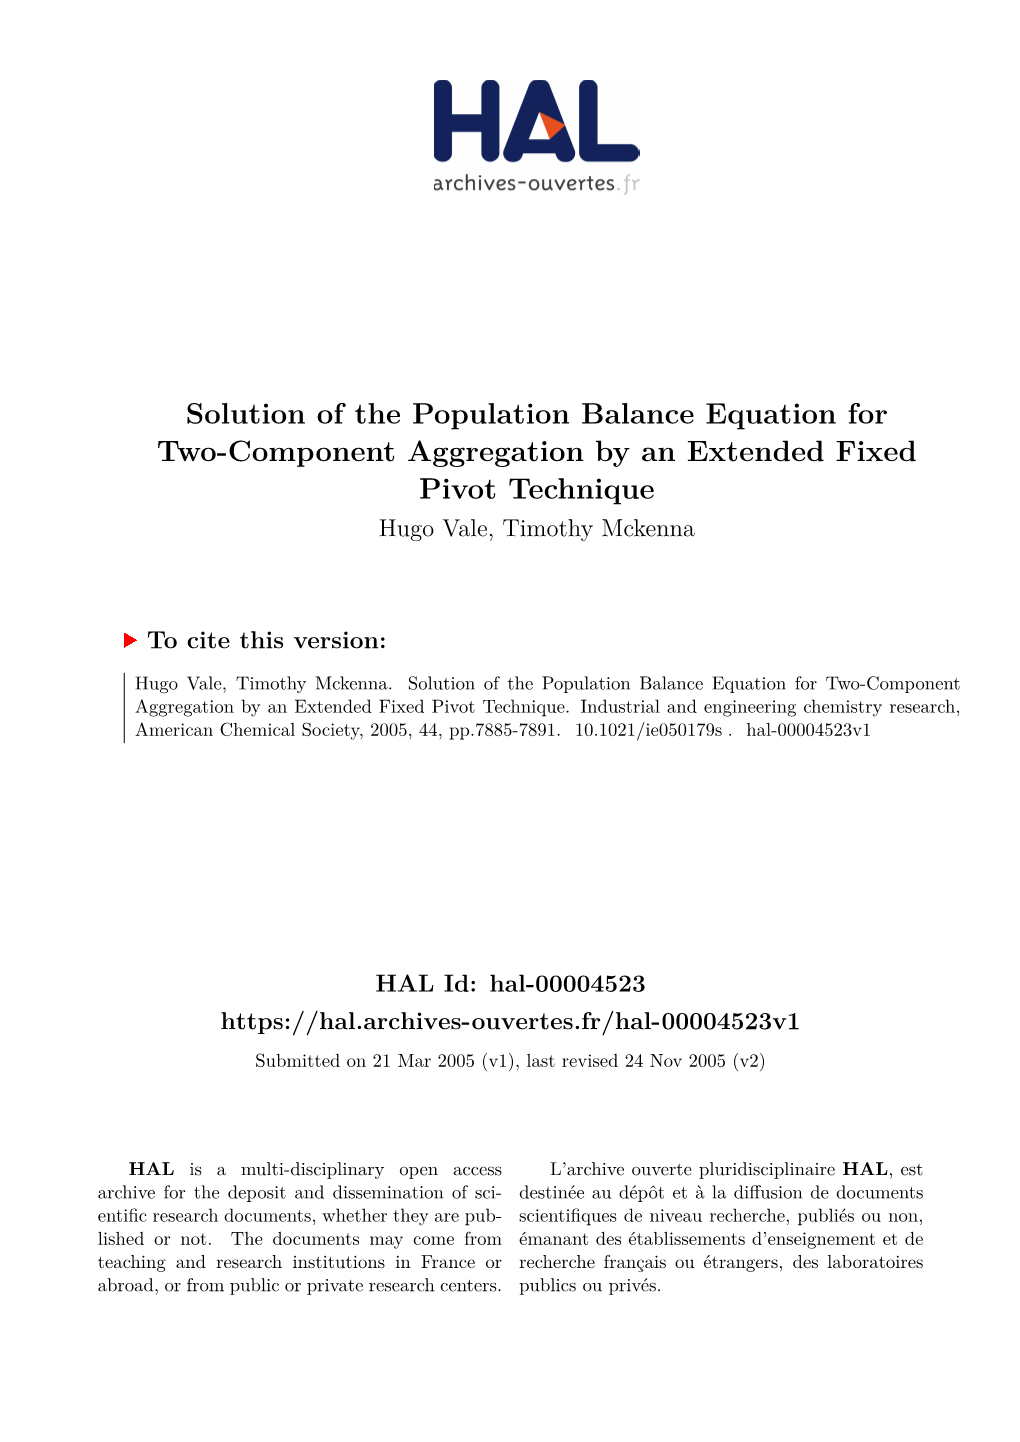 Solution of the Population Balance Equation for Two-Component Aggregation by an Extended Fixed Pivot Technique Hugo Vale, Timothy Mckenna